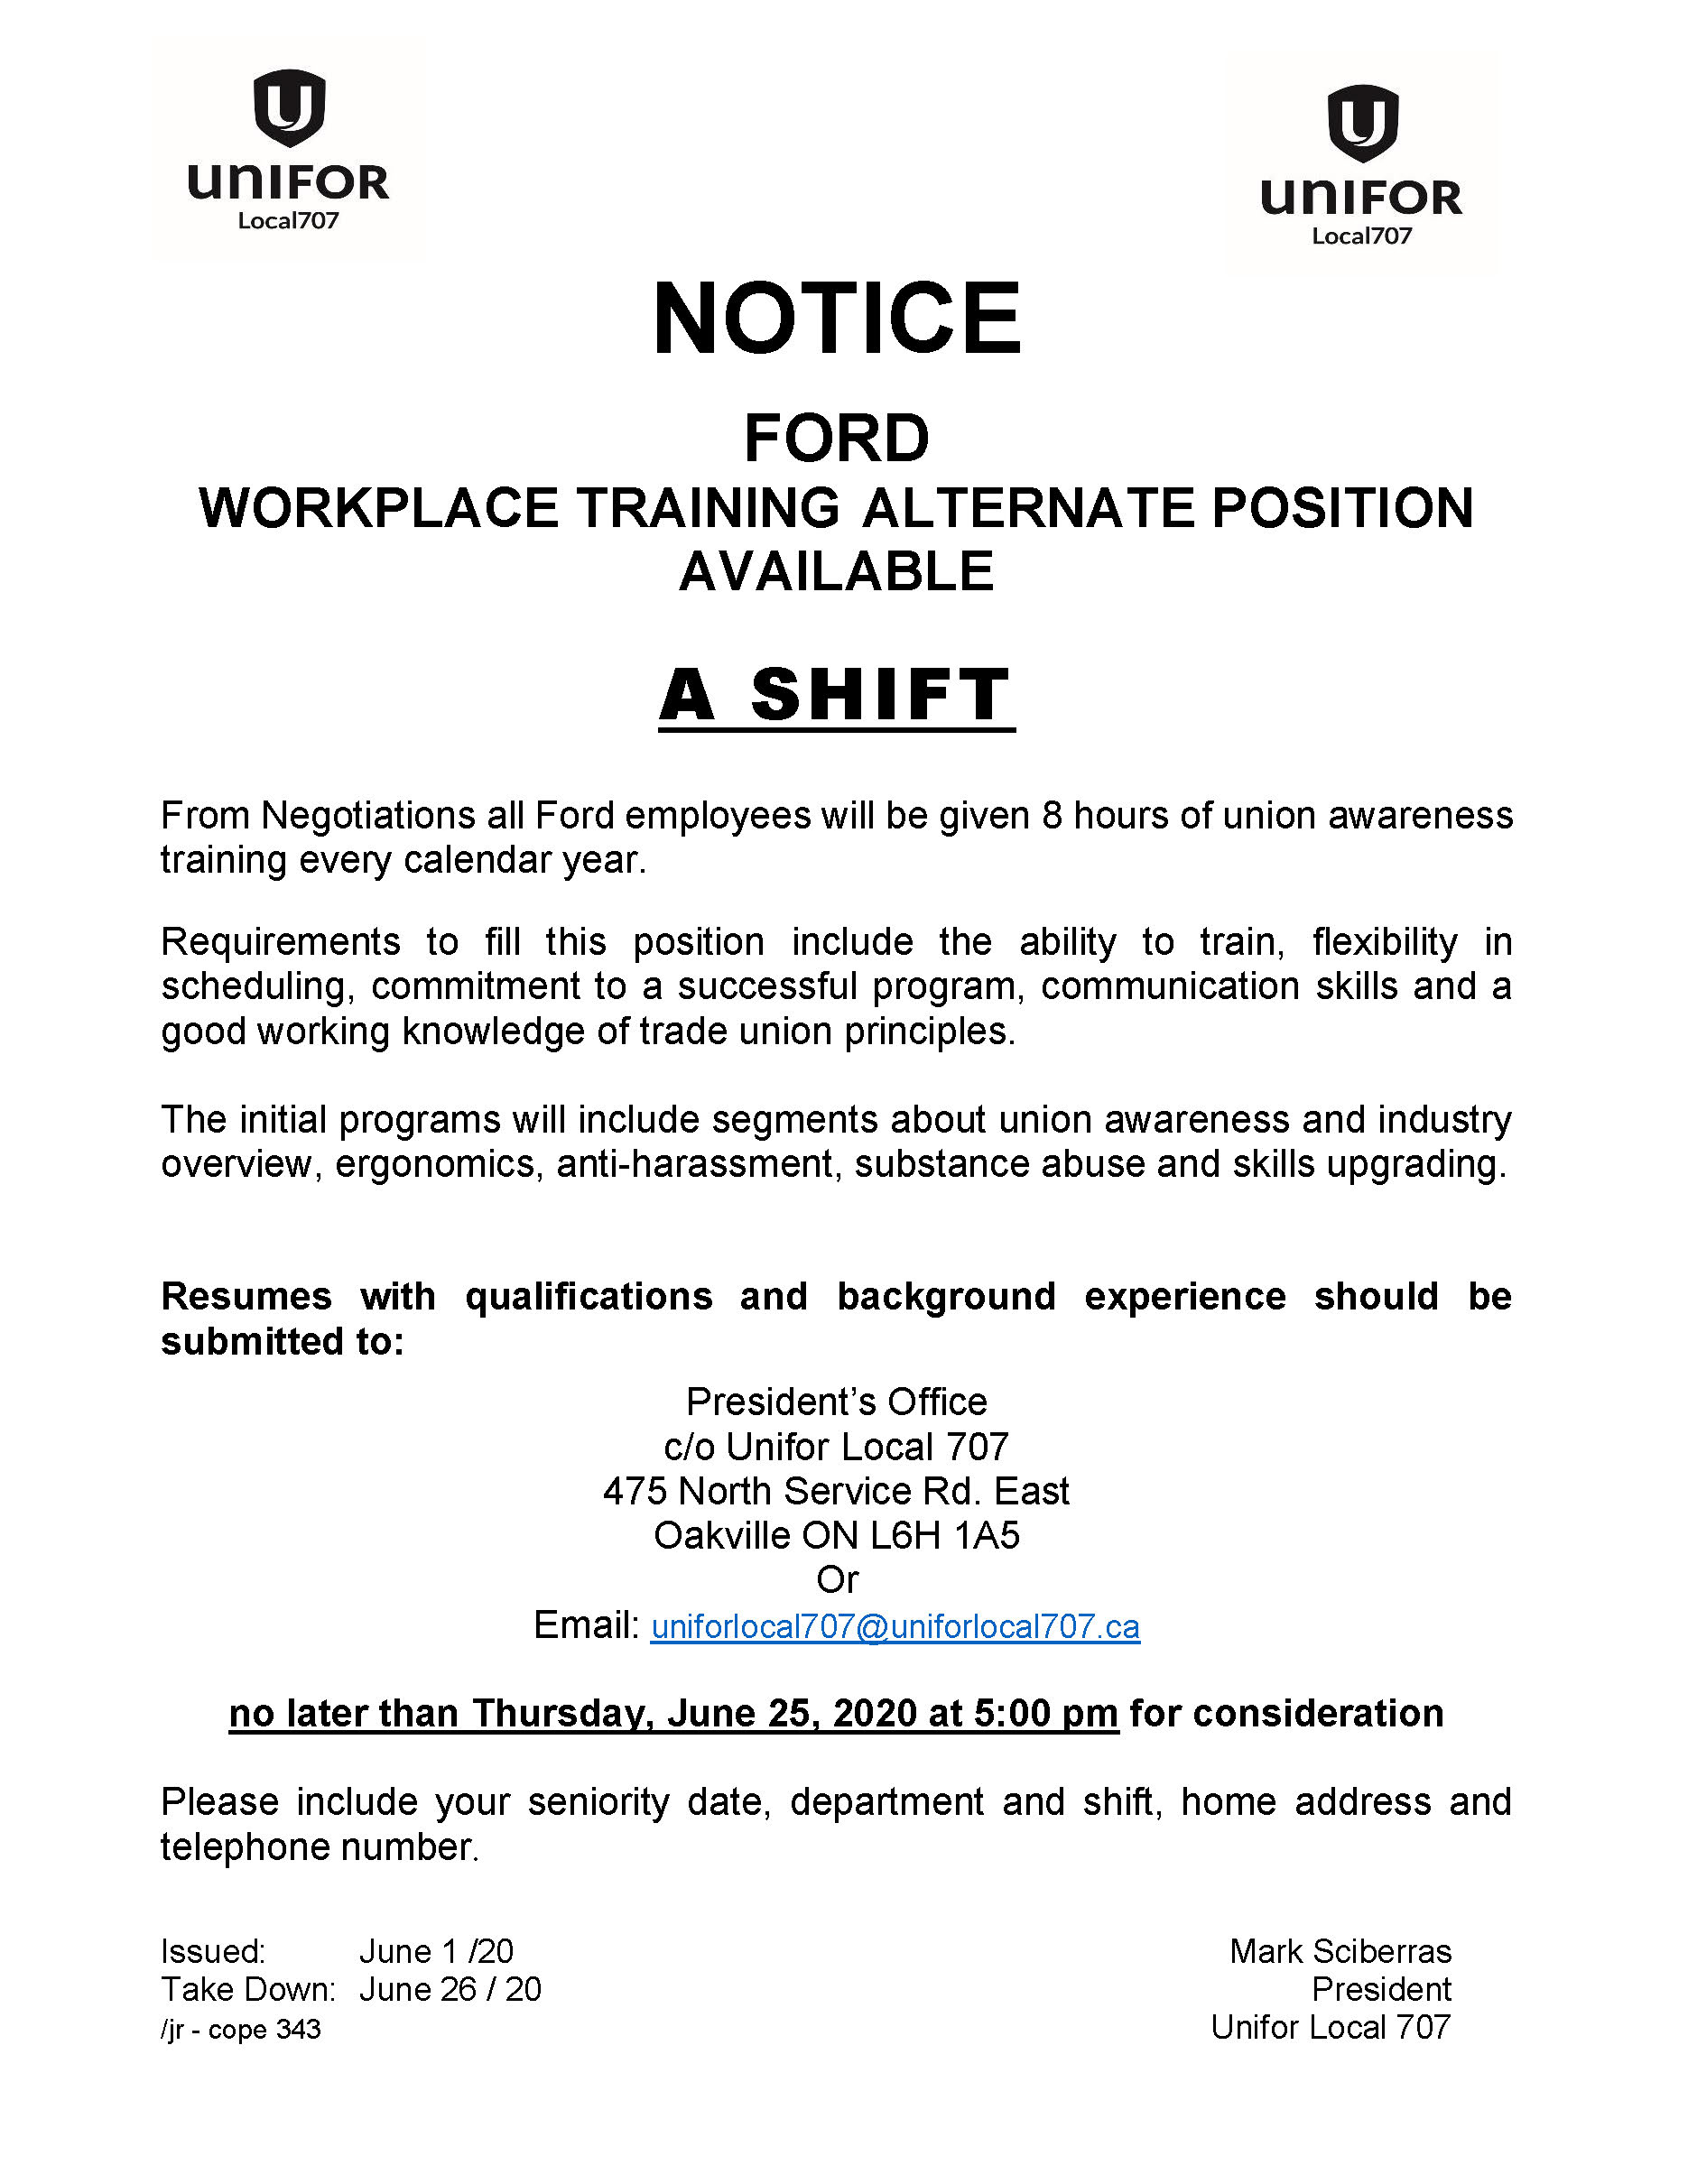 Ford Workplace Training Alternate Position A SHIFT resumes due 2020 JUNE 25